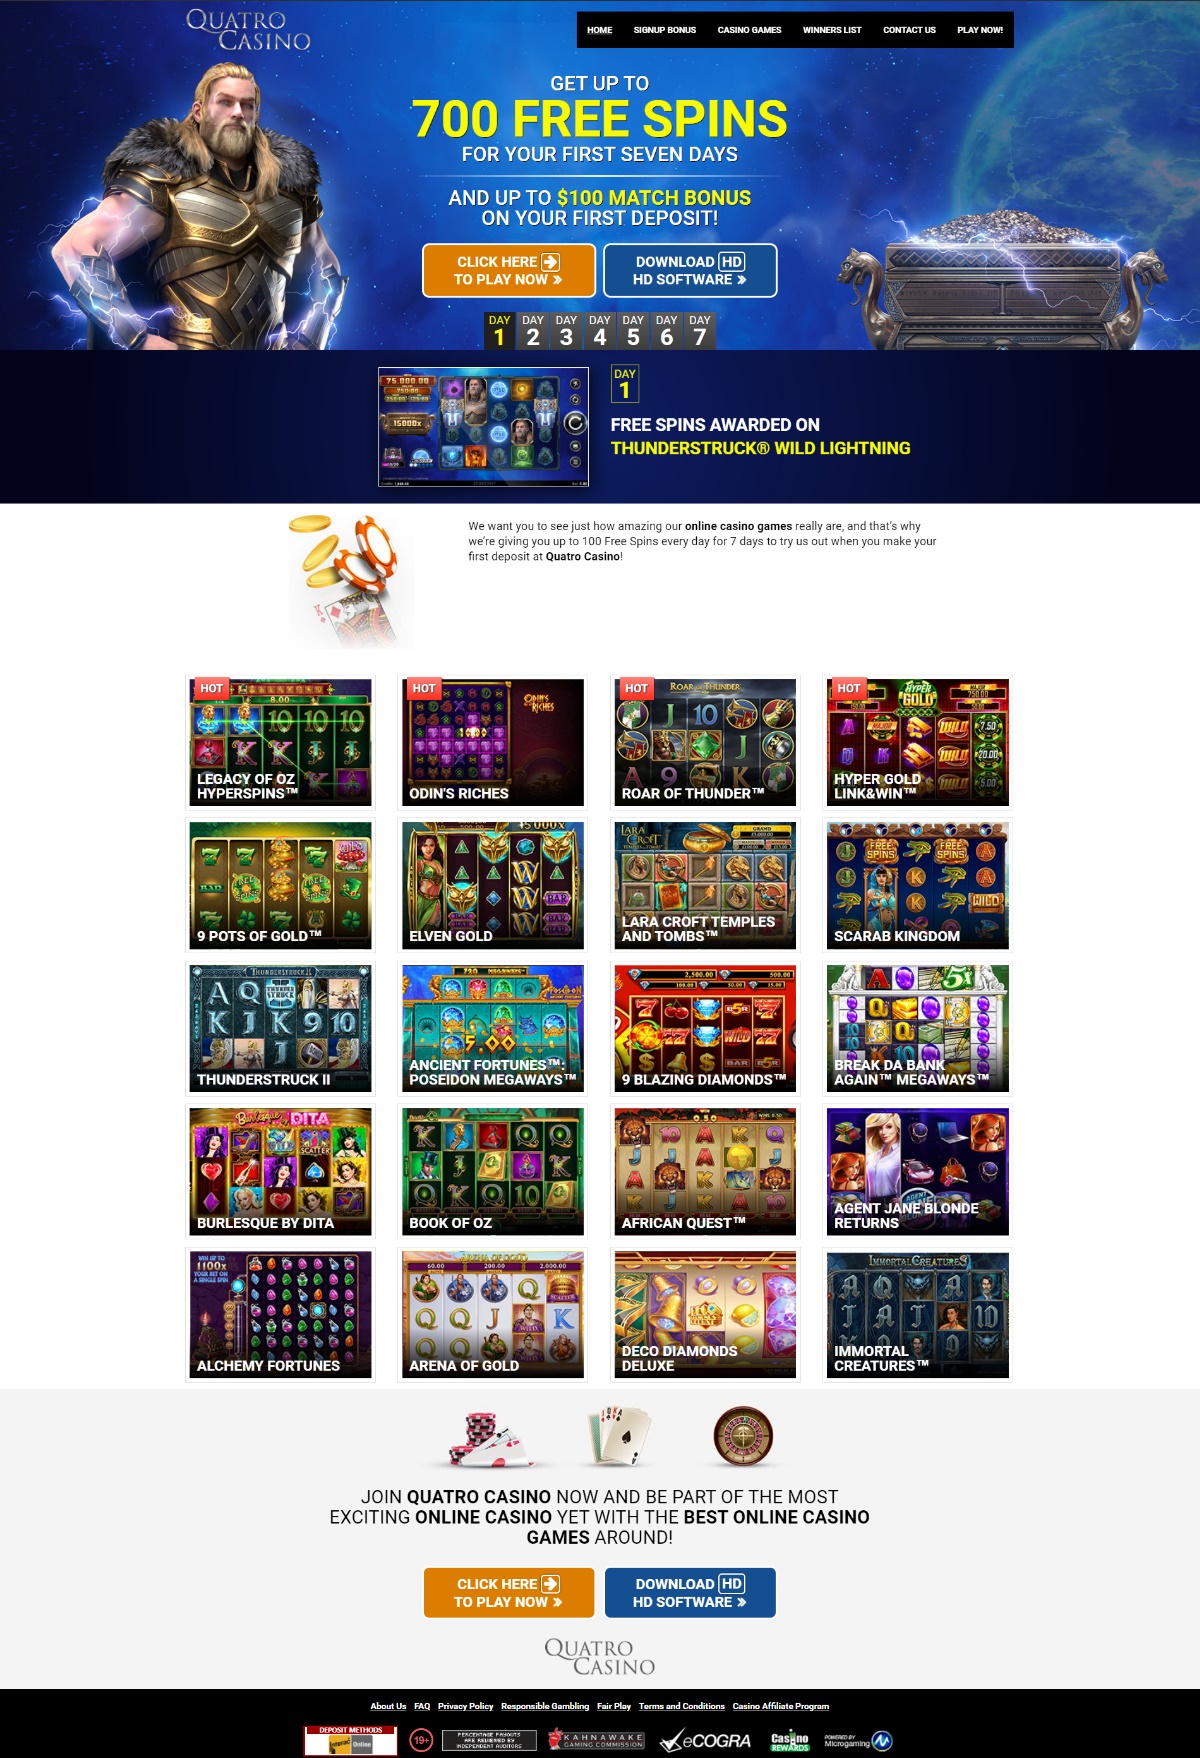 Get Free Spins for your first seven days and a Match Bonus on your first deposit at Quatro Casino! Quatro Casino want you to see just how amazing their online casino games really are, and that's why they're giving you up to 100 Free Spins every day for 7 days to try them out when you make your first deposit at Quatro Casino! What are you waiting for? Use your bonus to try out their exciting progressive jackpot slots including their Millionaire maker Mega Moolah, and a huge variety of other online casino games such as Slot Games, Blackjack, Roulette, Video Poker and of course many Progressive Slots! Only the best online casino games at Quatro Casino! With over 550 of the best online casino games to choose from, you are bound to find the ones to suit you at Quatro Casino. Let yourself be blown away by their amazing feature-rich graphics, their sheer variety and see your name on their latest winners' page!